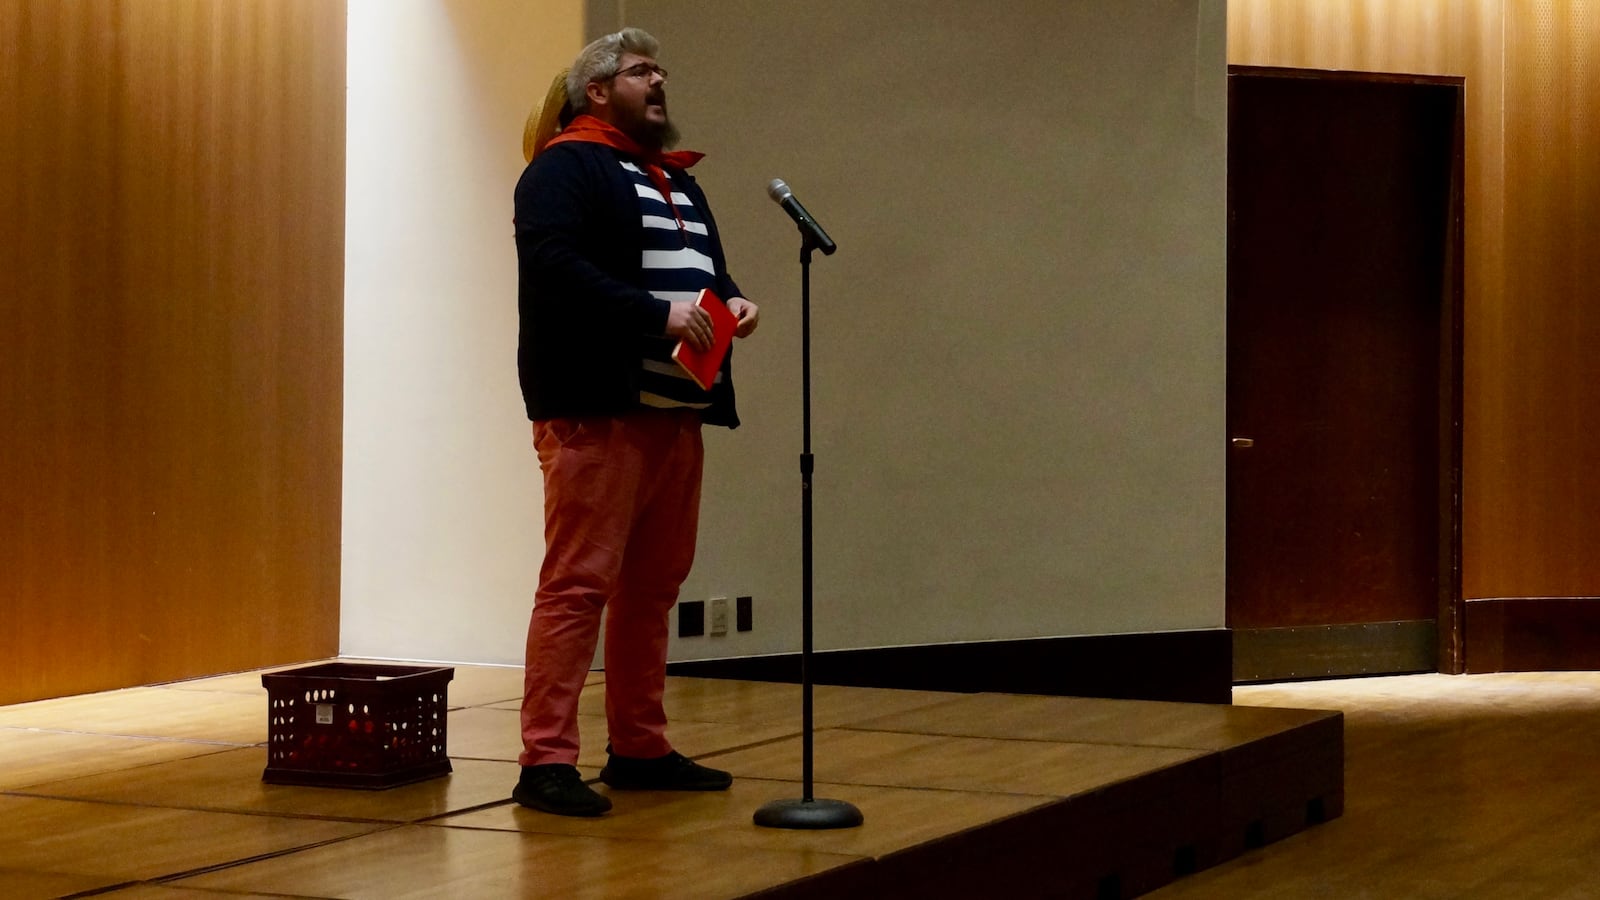 Derek Gould, a teacher at Paramount Brookside, talked about his second job as a singing gondolier at a story slam on teacher pay.